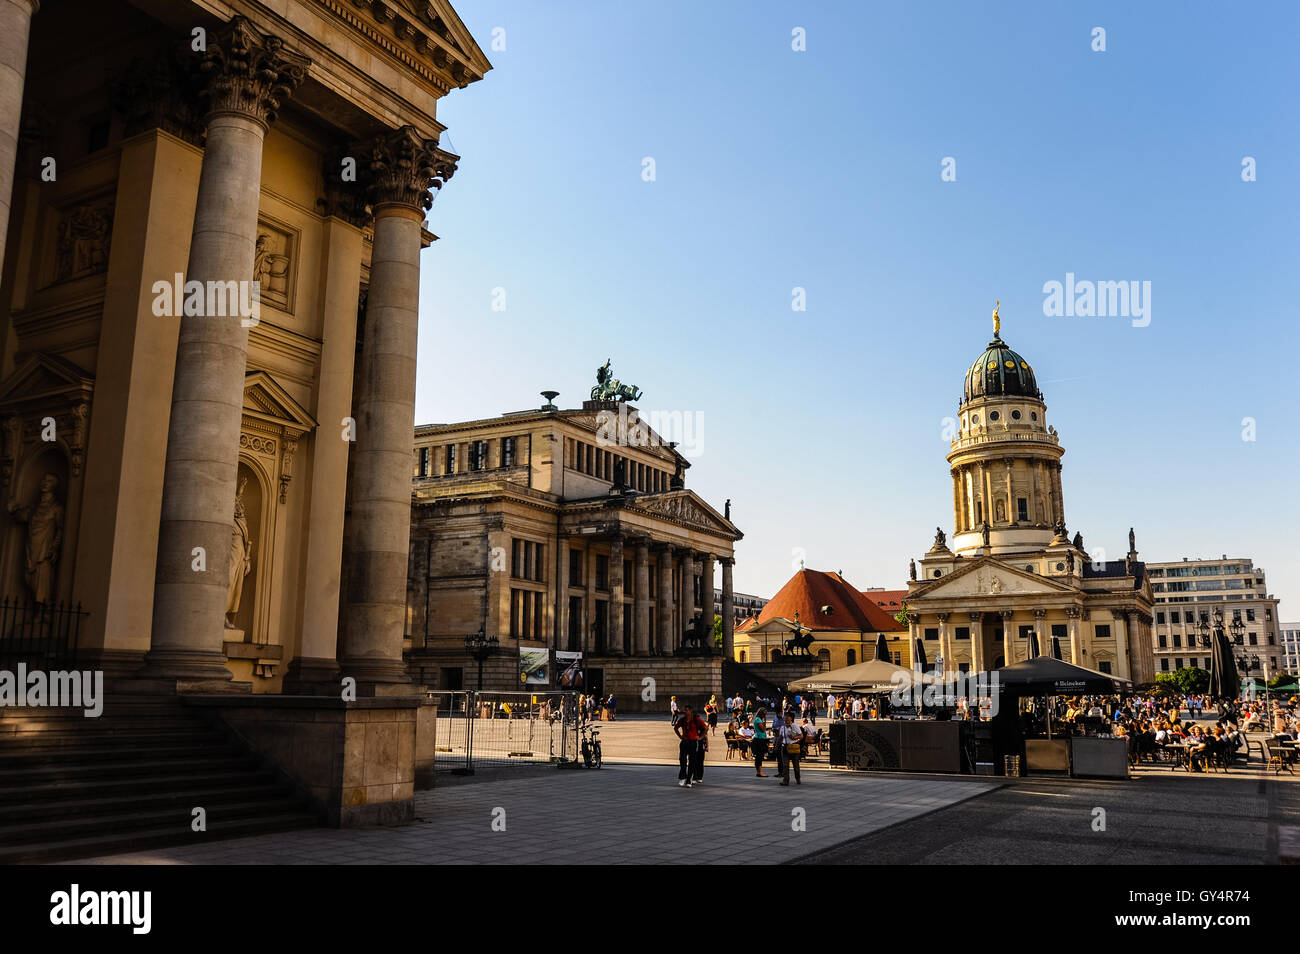 Berlin, Germany. The Gendarmenmarkt is a large and famous square in Berlin, the site of the Konzerthaus and the French and German Cathedrals. Stock Photo